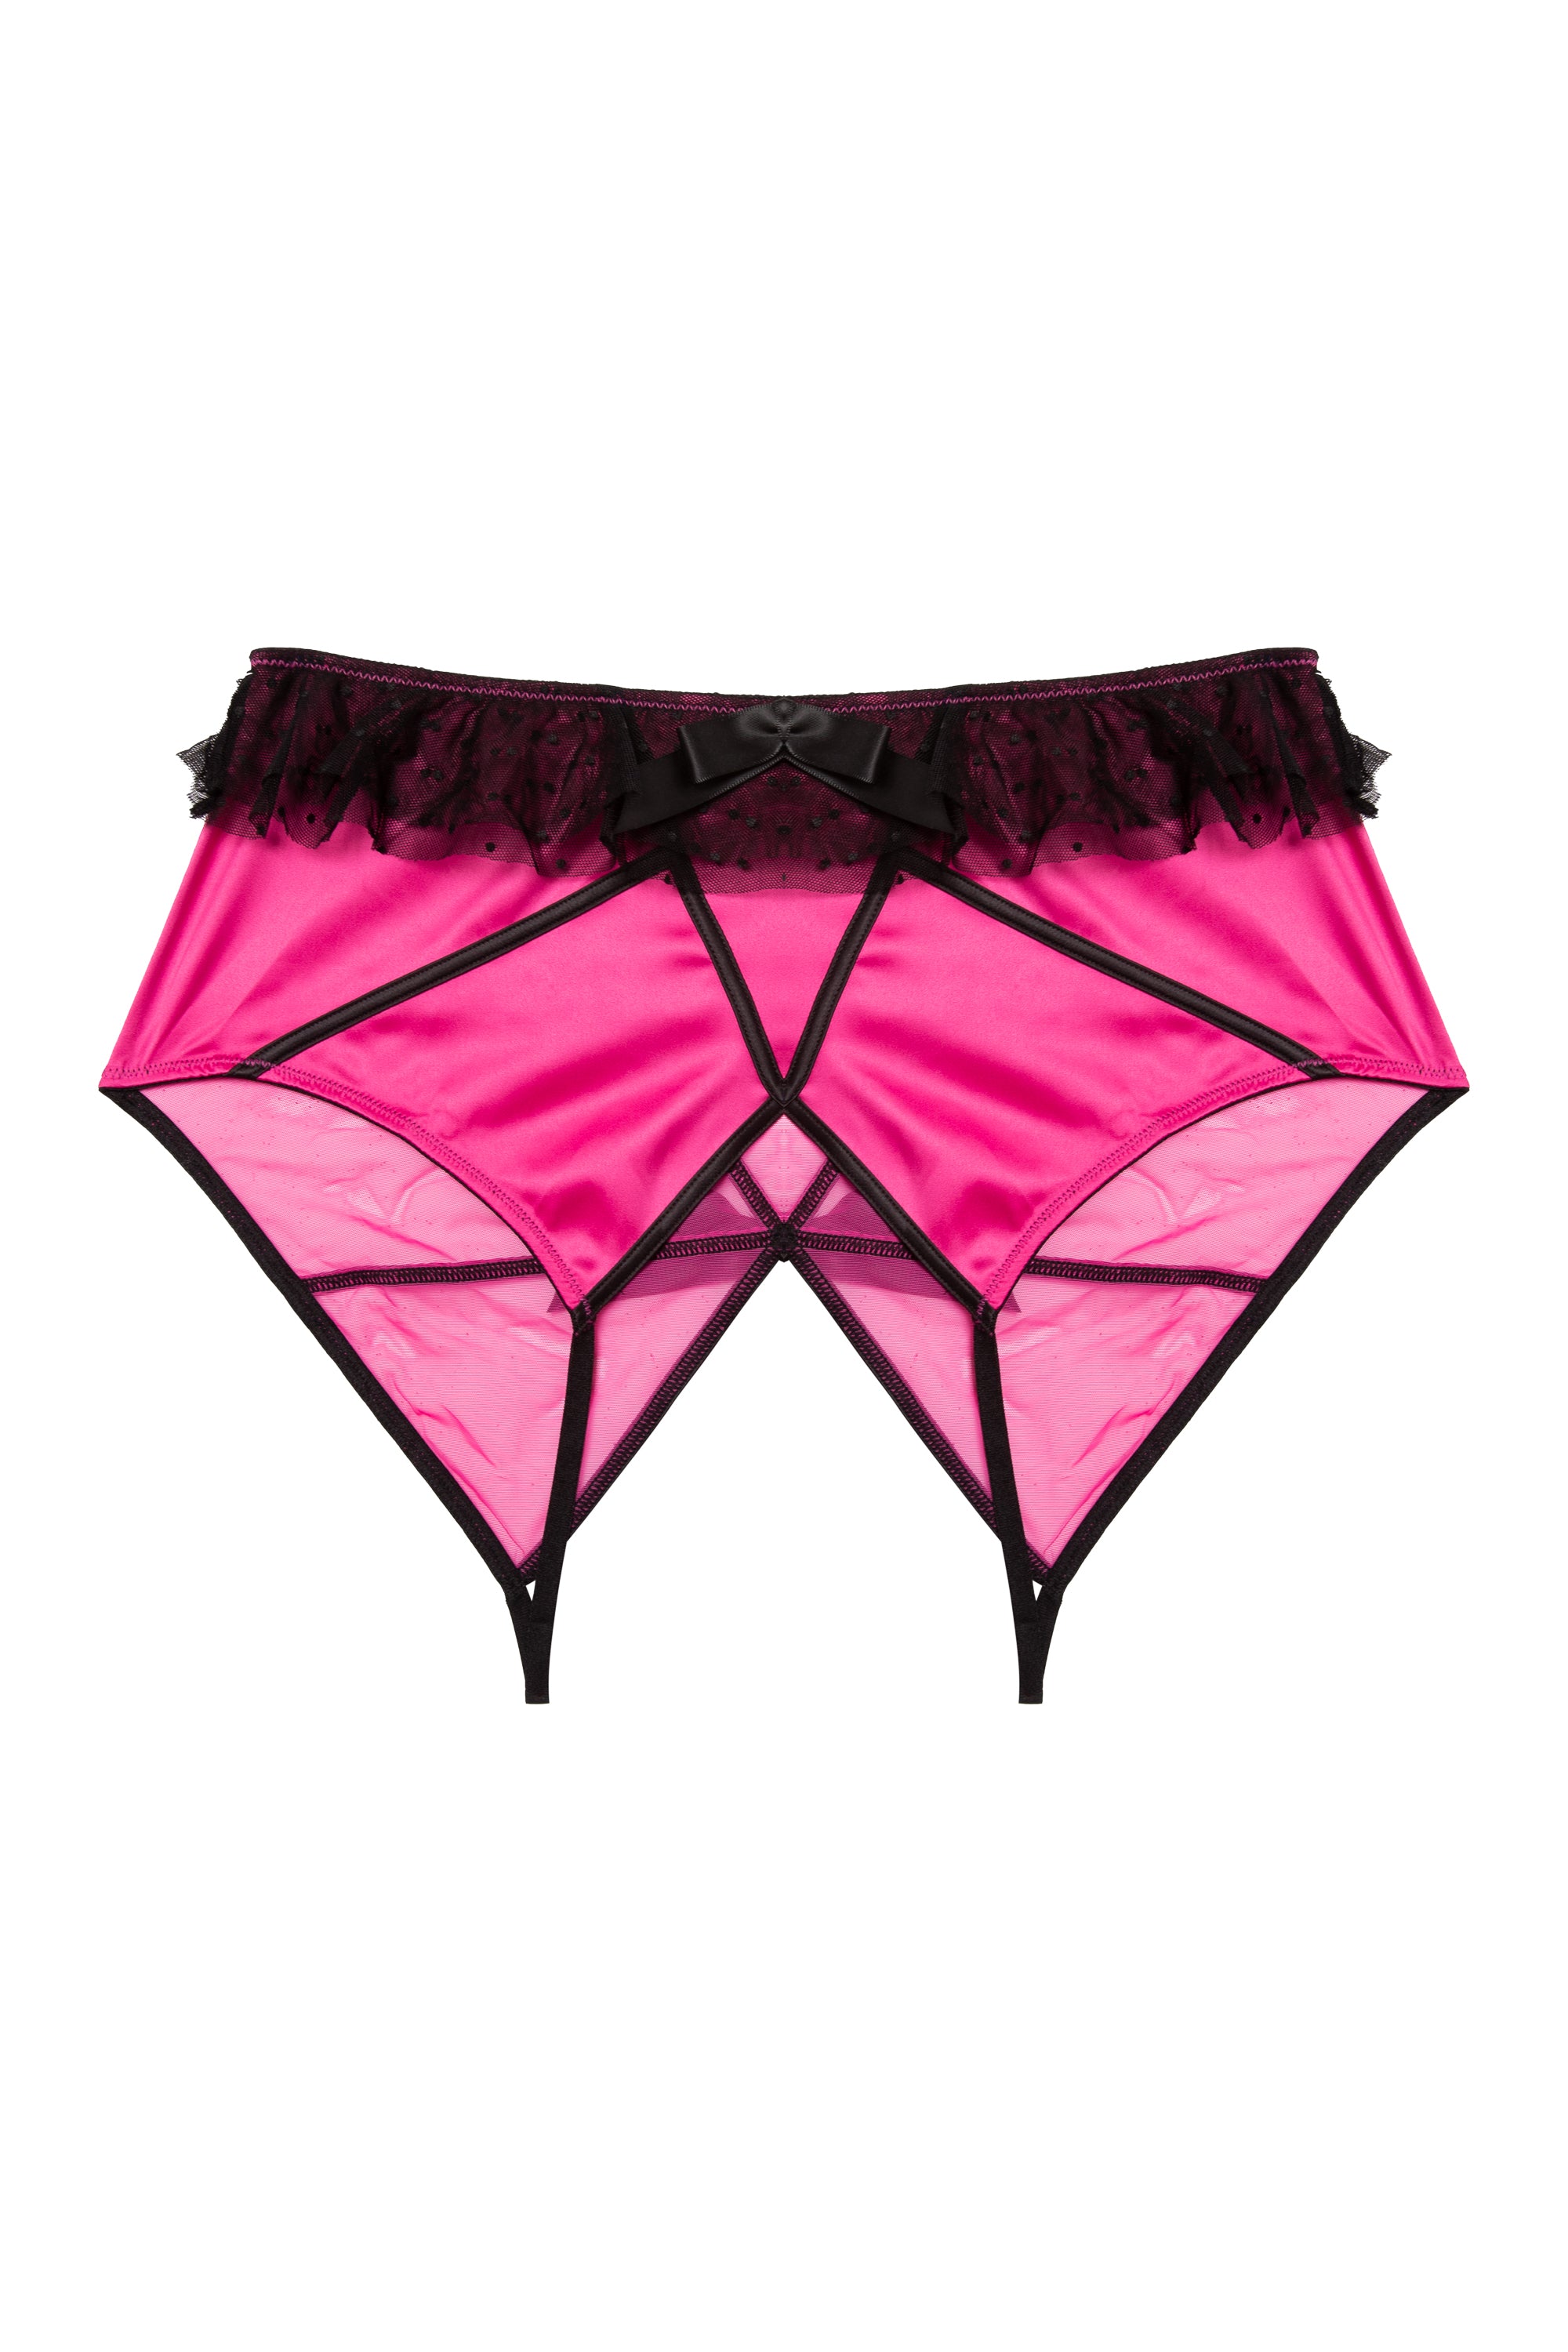 Crotchless Panties Plus Size XL - 6XL Pink French Knickers Open